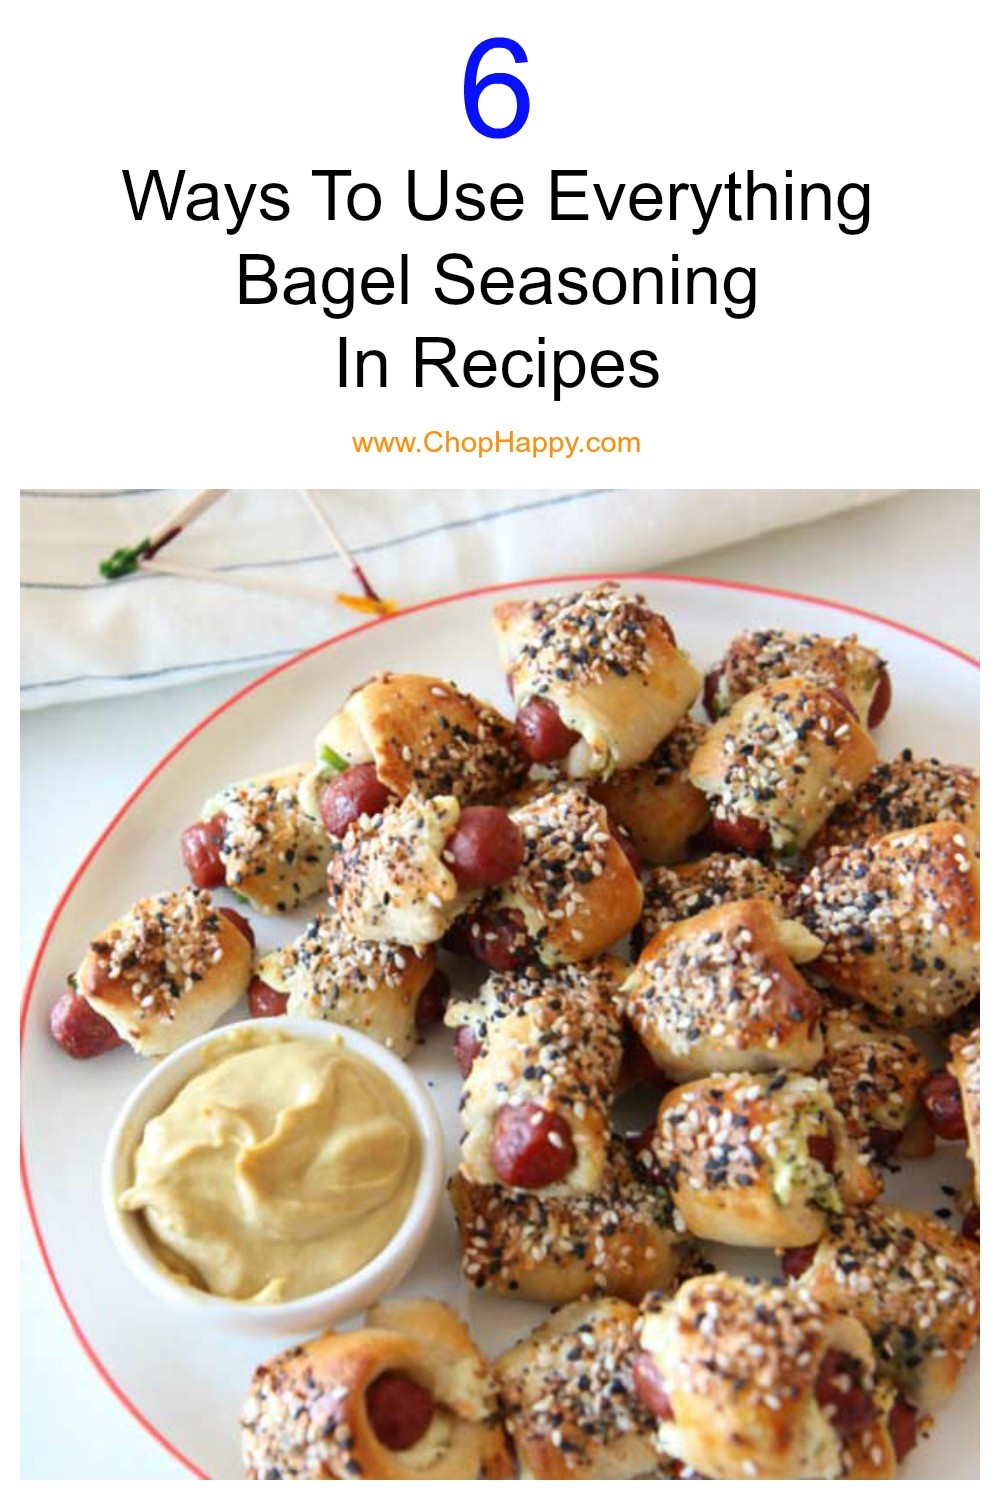 6 Ways To Use Everything Bagel Seasoning In Recipes. Garlic, sesame seeds, onion, and other seasonings make bagel magic. Put the seasoning on potato salad, calzones, pigs in blanket, and 7 layer dips. Happy Cooking. www.ChopHappy.com #everythingbagelseasoning #bagel